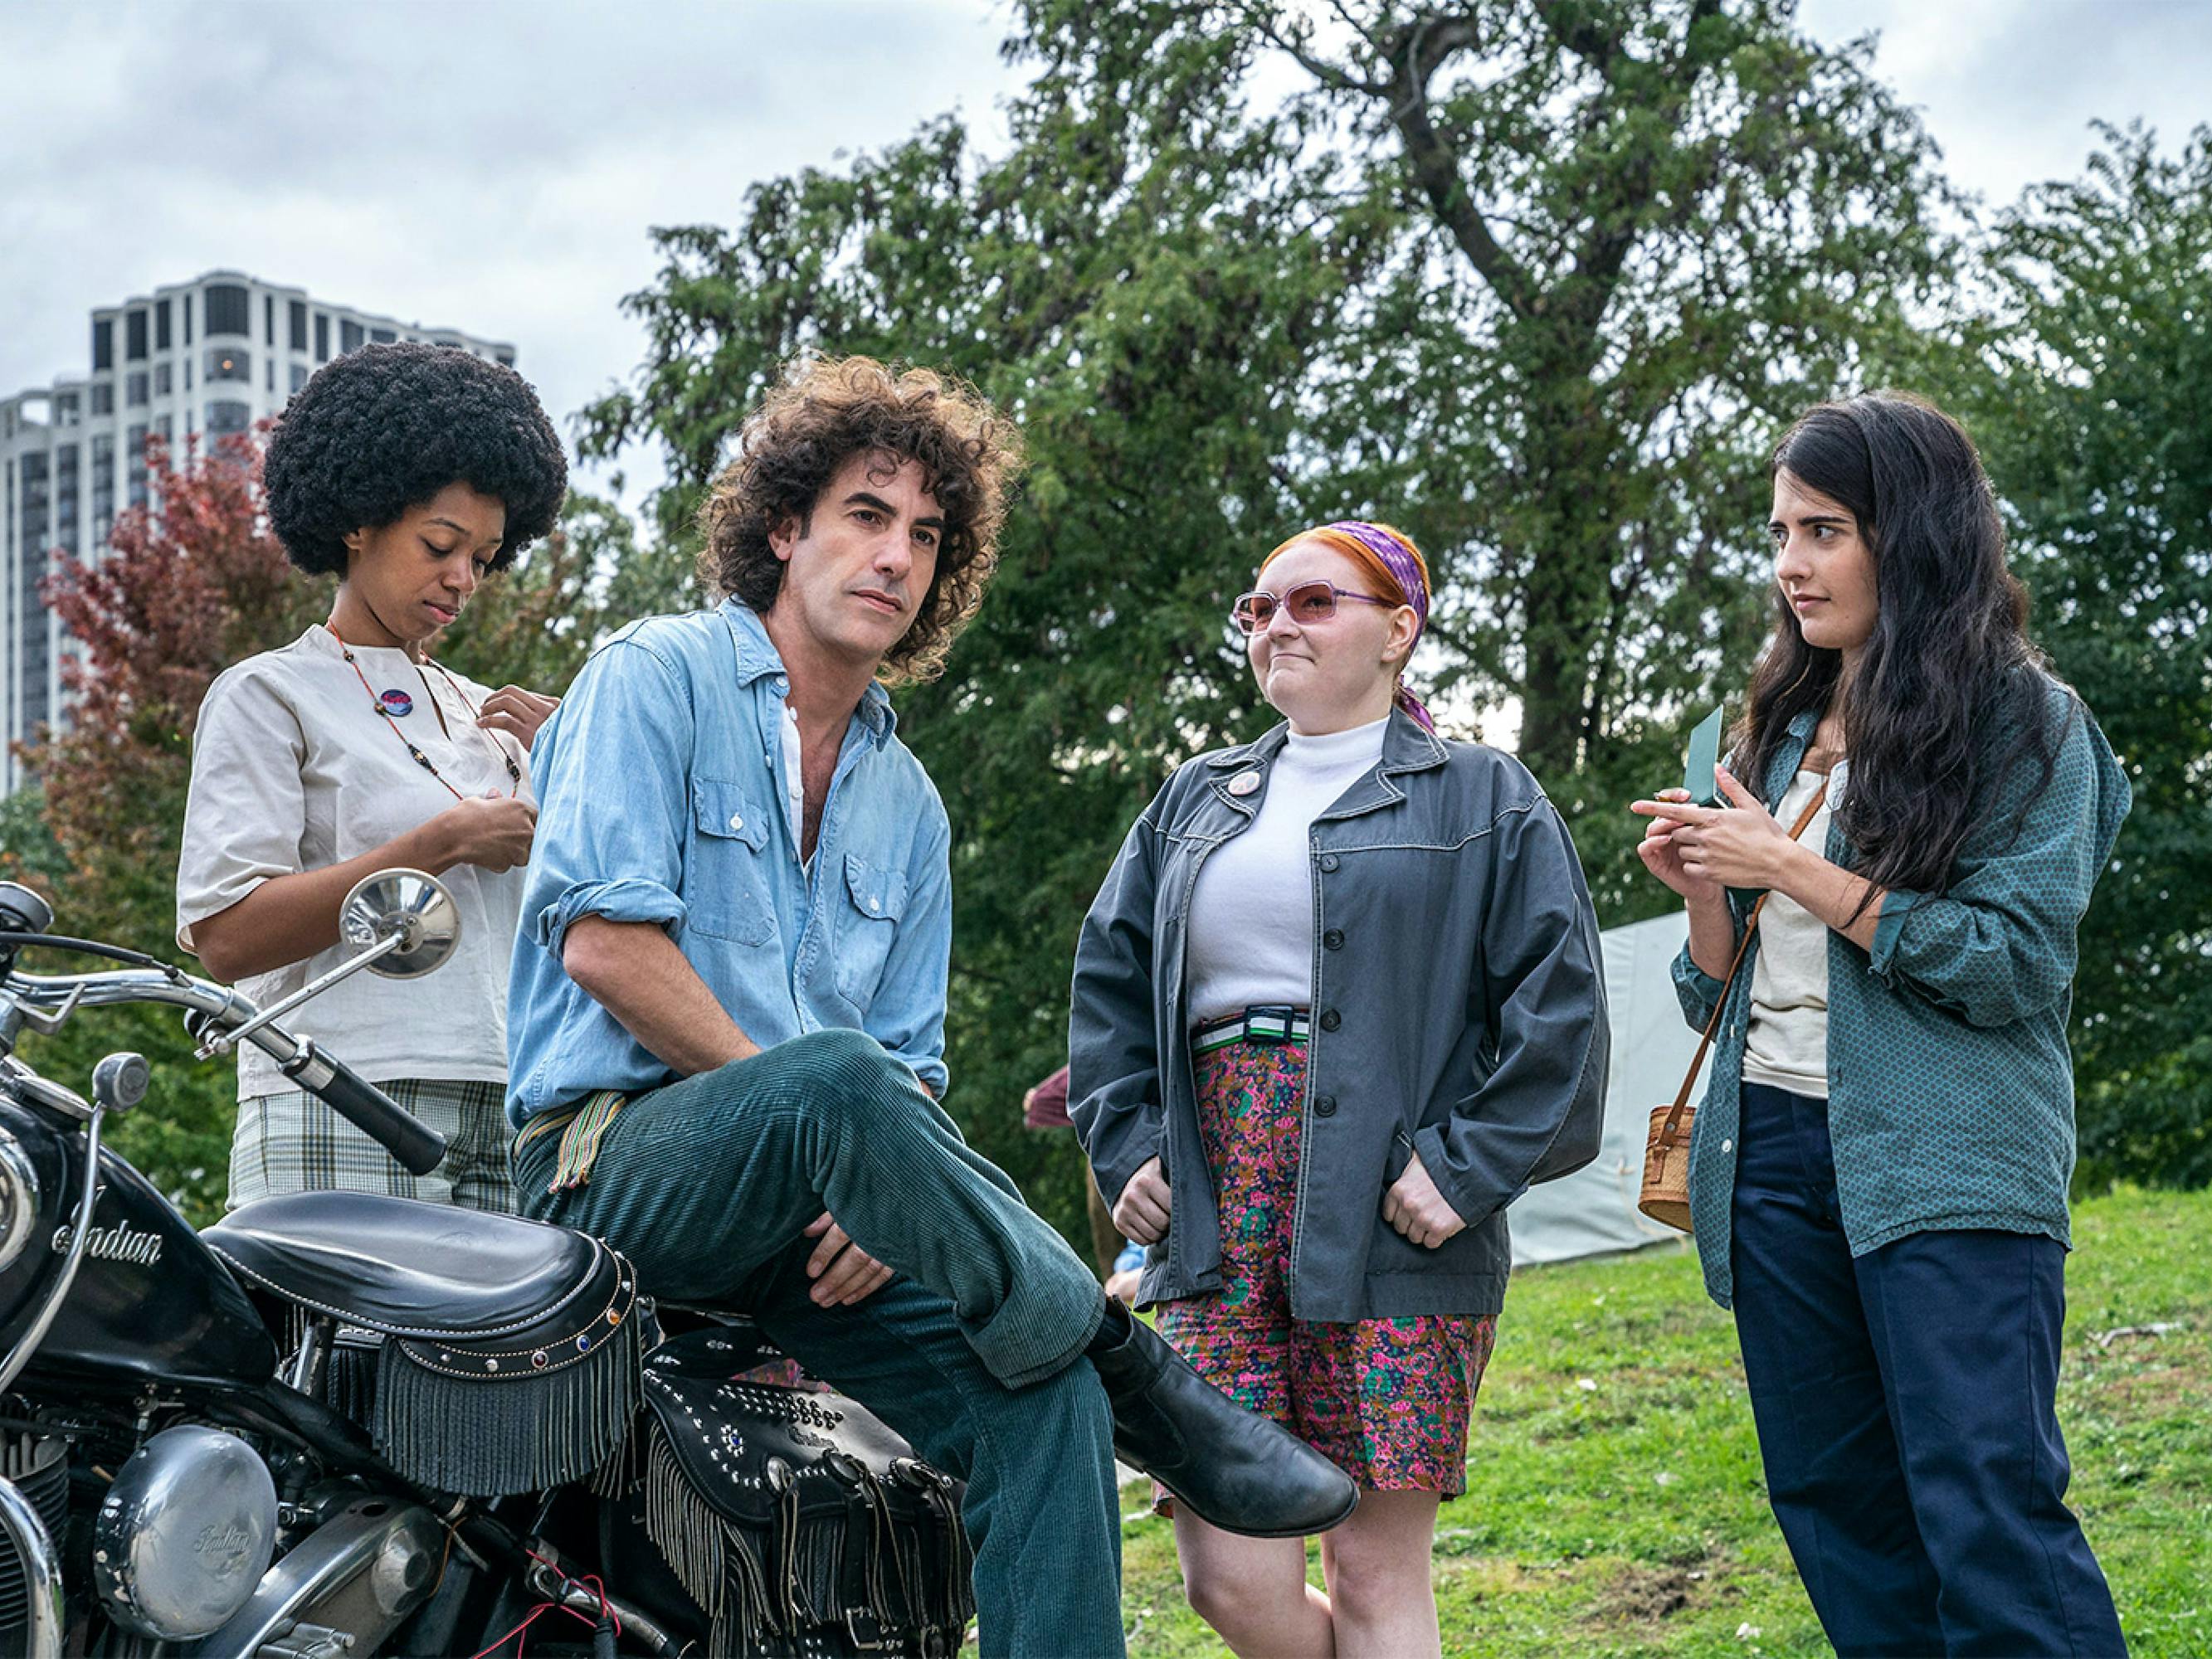 The actor sits on a motorcycle, surrounded by three other actors in retro 60s clothing. He wears a jean shirt, black leather boots, and his hair looks wild.